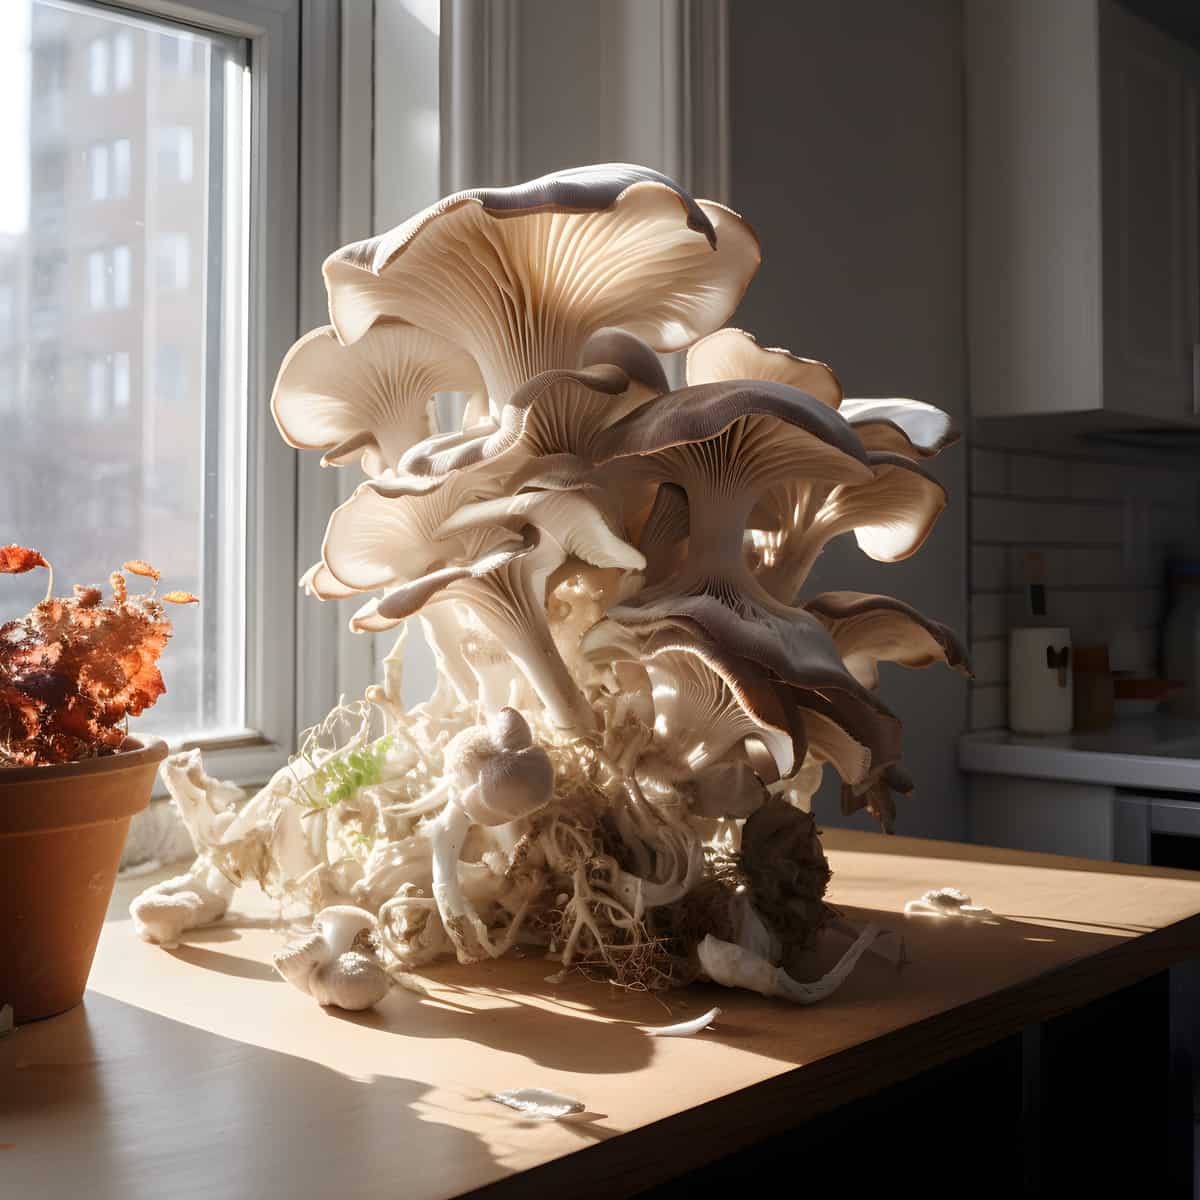 Oyster Mushrooms on a kitchen counter